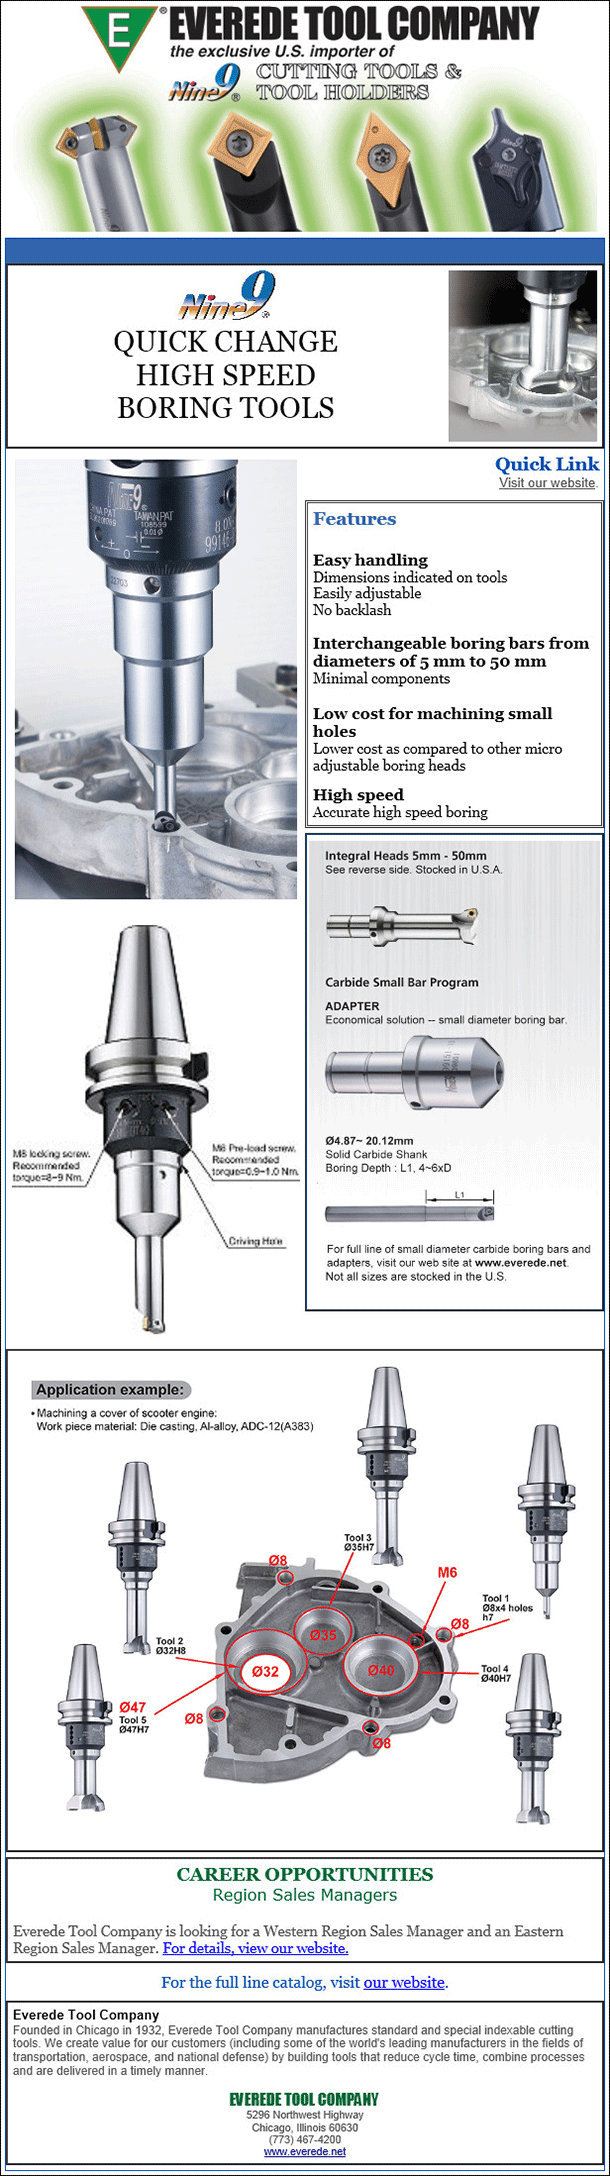 eNews Quick Change High Speed Boring Tools Email Promo